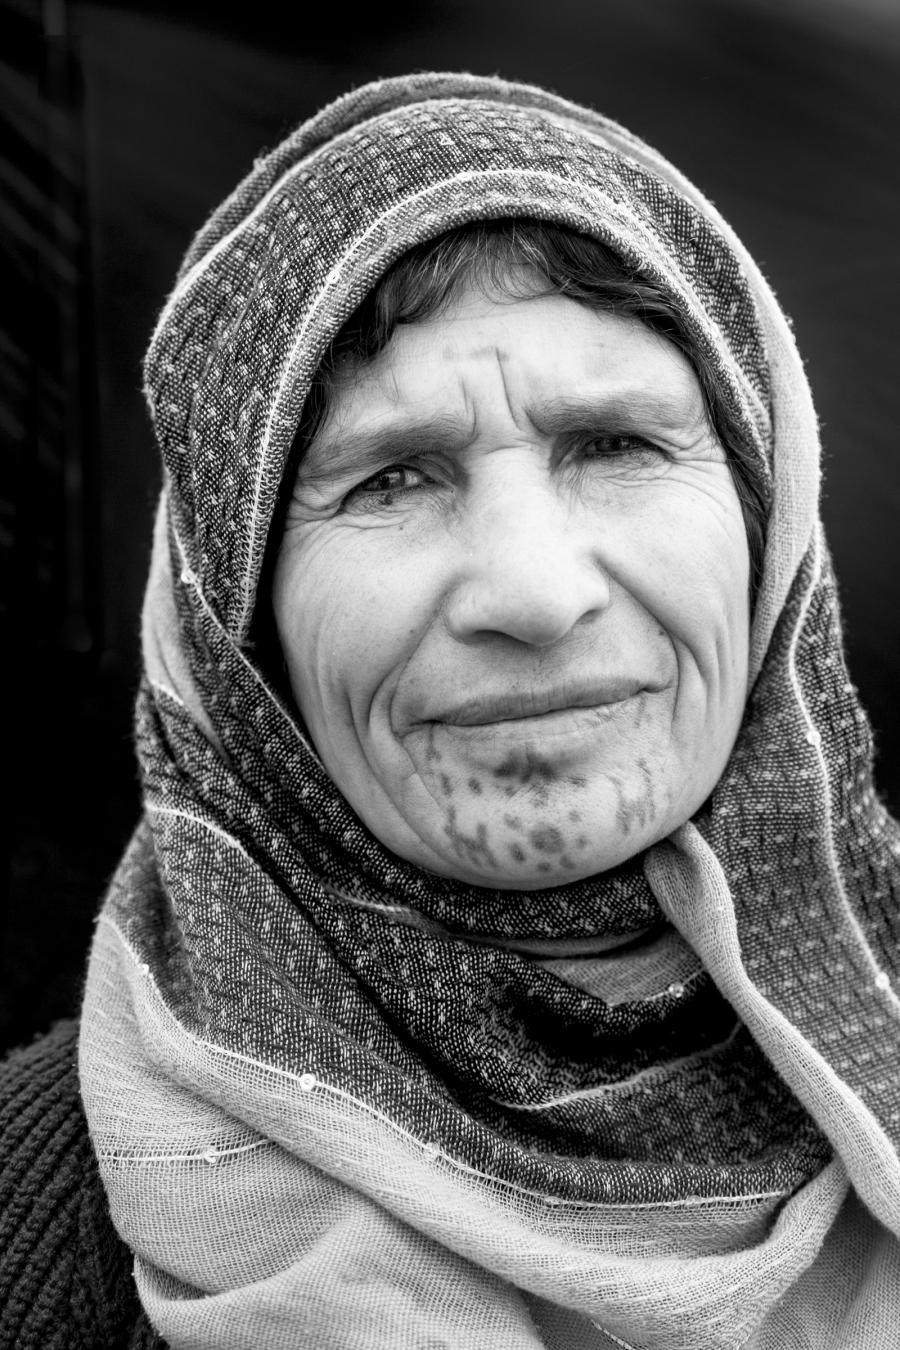 Amina Saleh--60 year-old woman from Musko, a village of Kobani, at Bulgur Fabrikası refugee camp in Suruc, Turkey, October 25, 2014. Mother of 6, she got her face tattooed when she was about 10 years old.